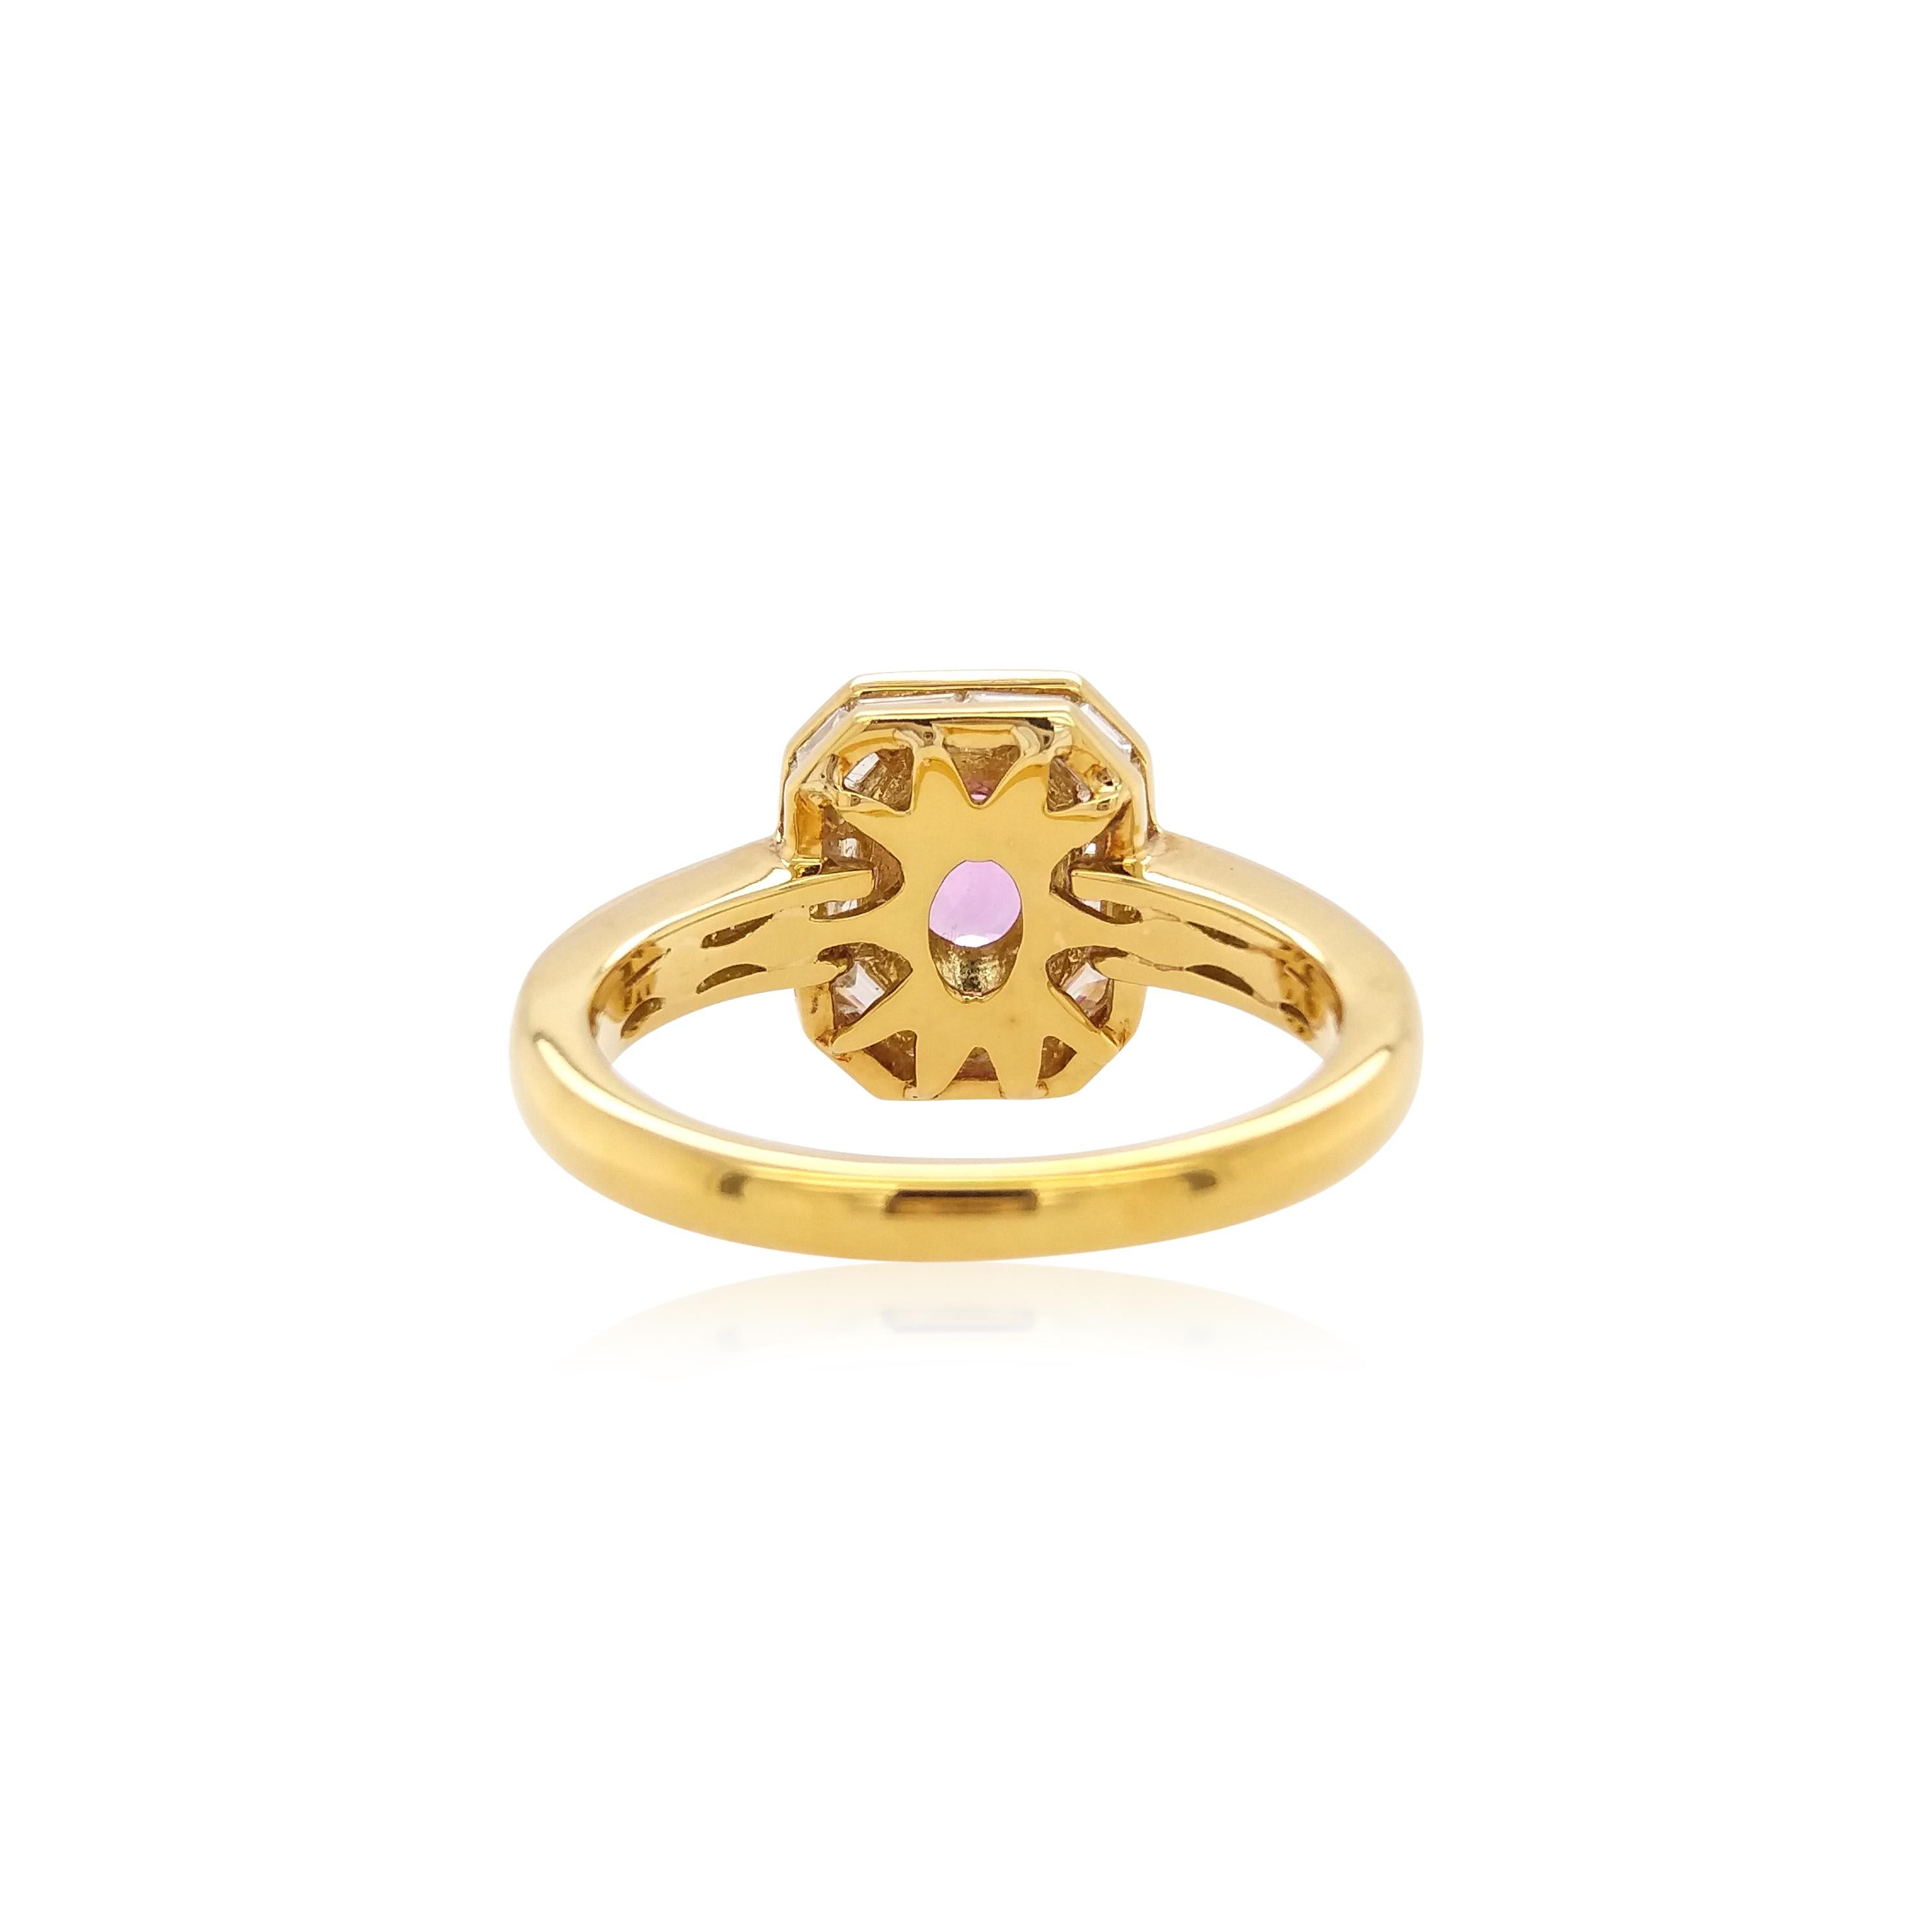 This graceful design captures the beauty of the spectacular oval-shaped pink sapphire by framing it in ornate arrangement of tapered-baguette diamonds set in 18K yellow gold. Bold and striking, this unique ring is the perfect statement piece. Each